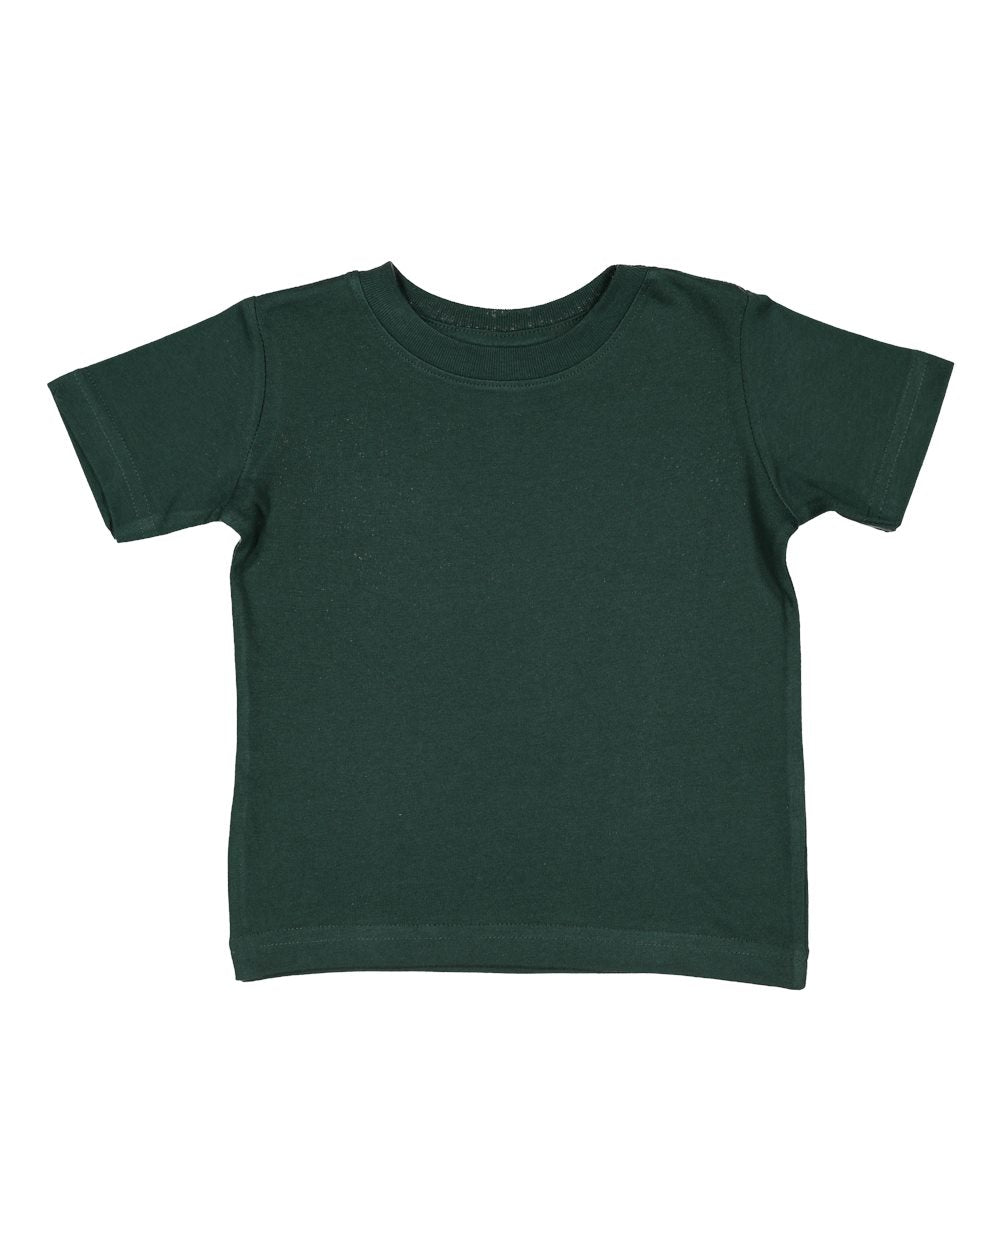 rabbit skins infant jersey tee forest green